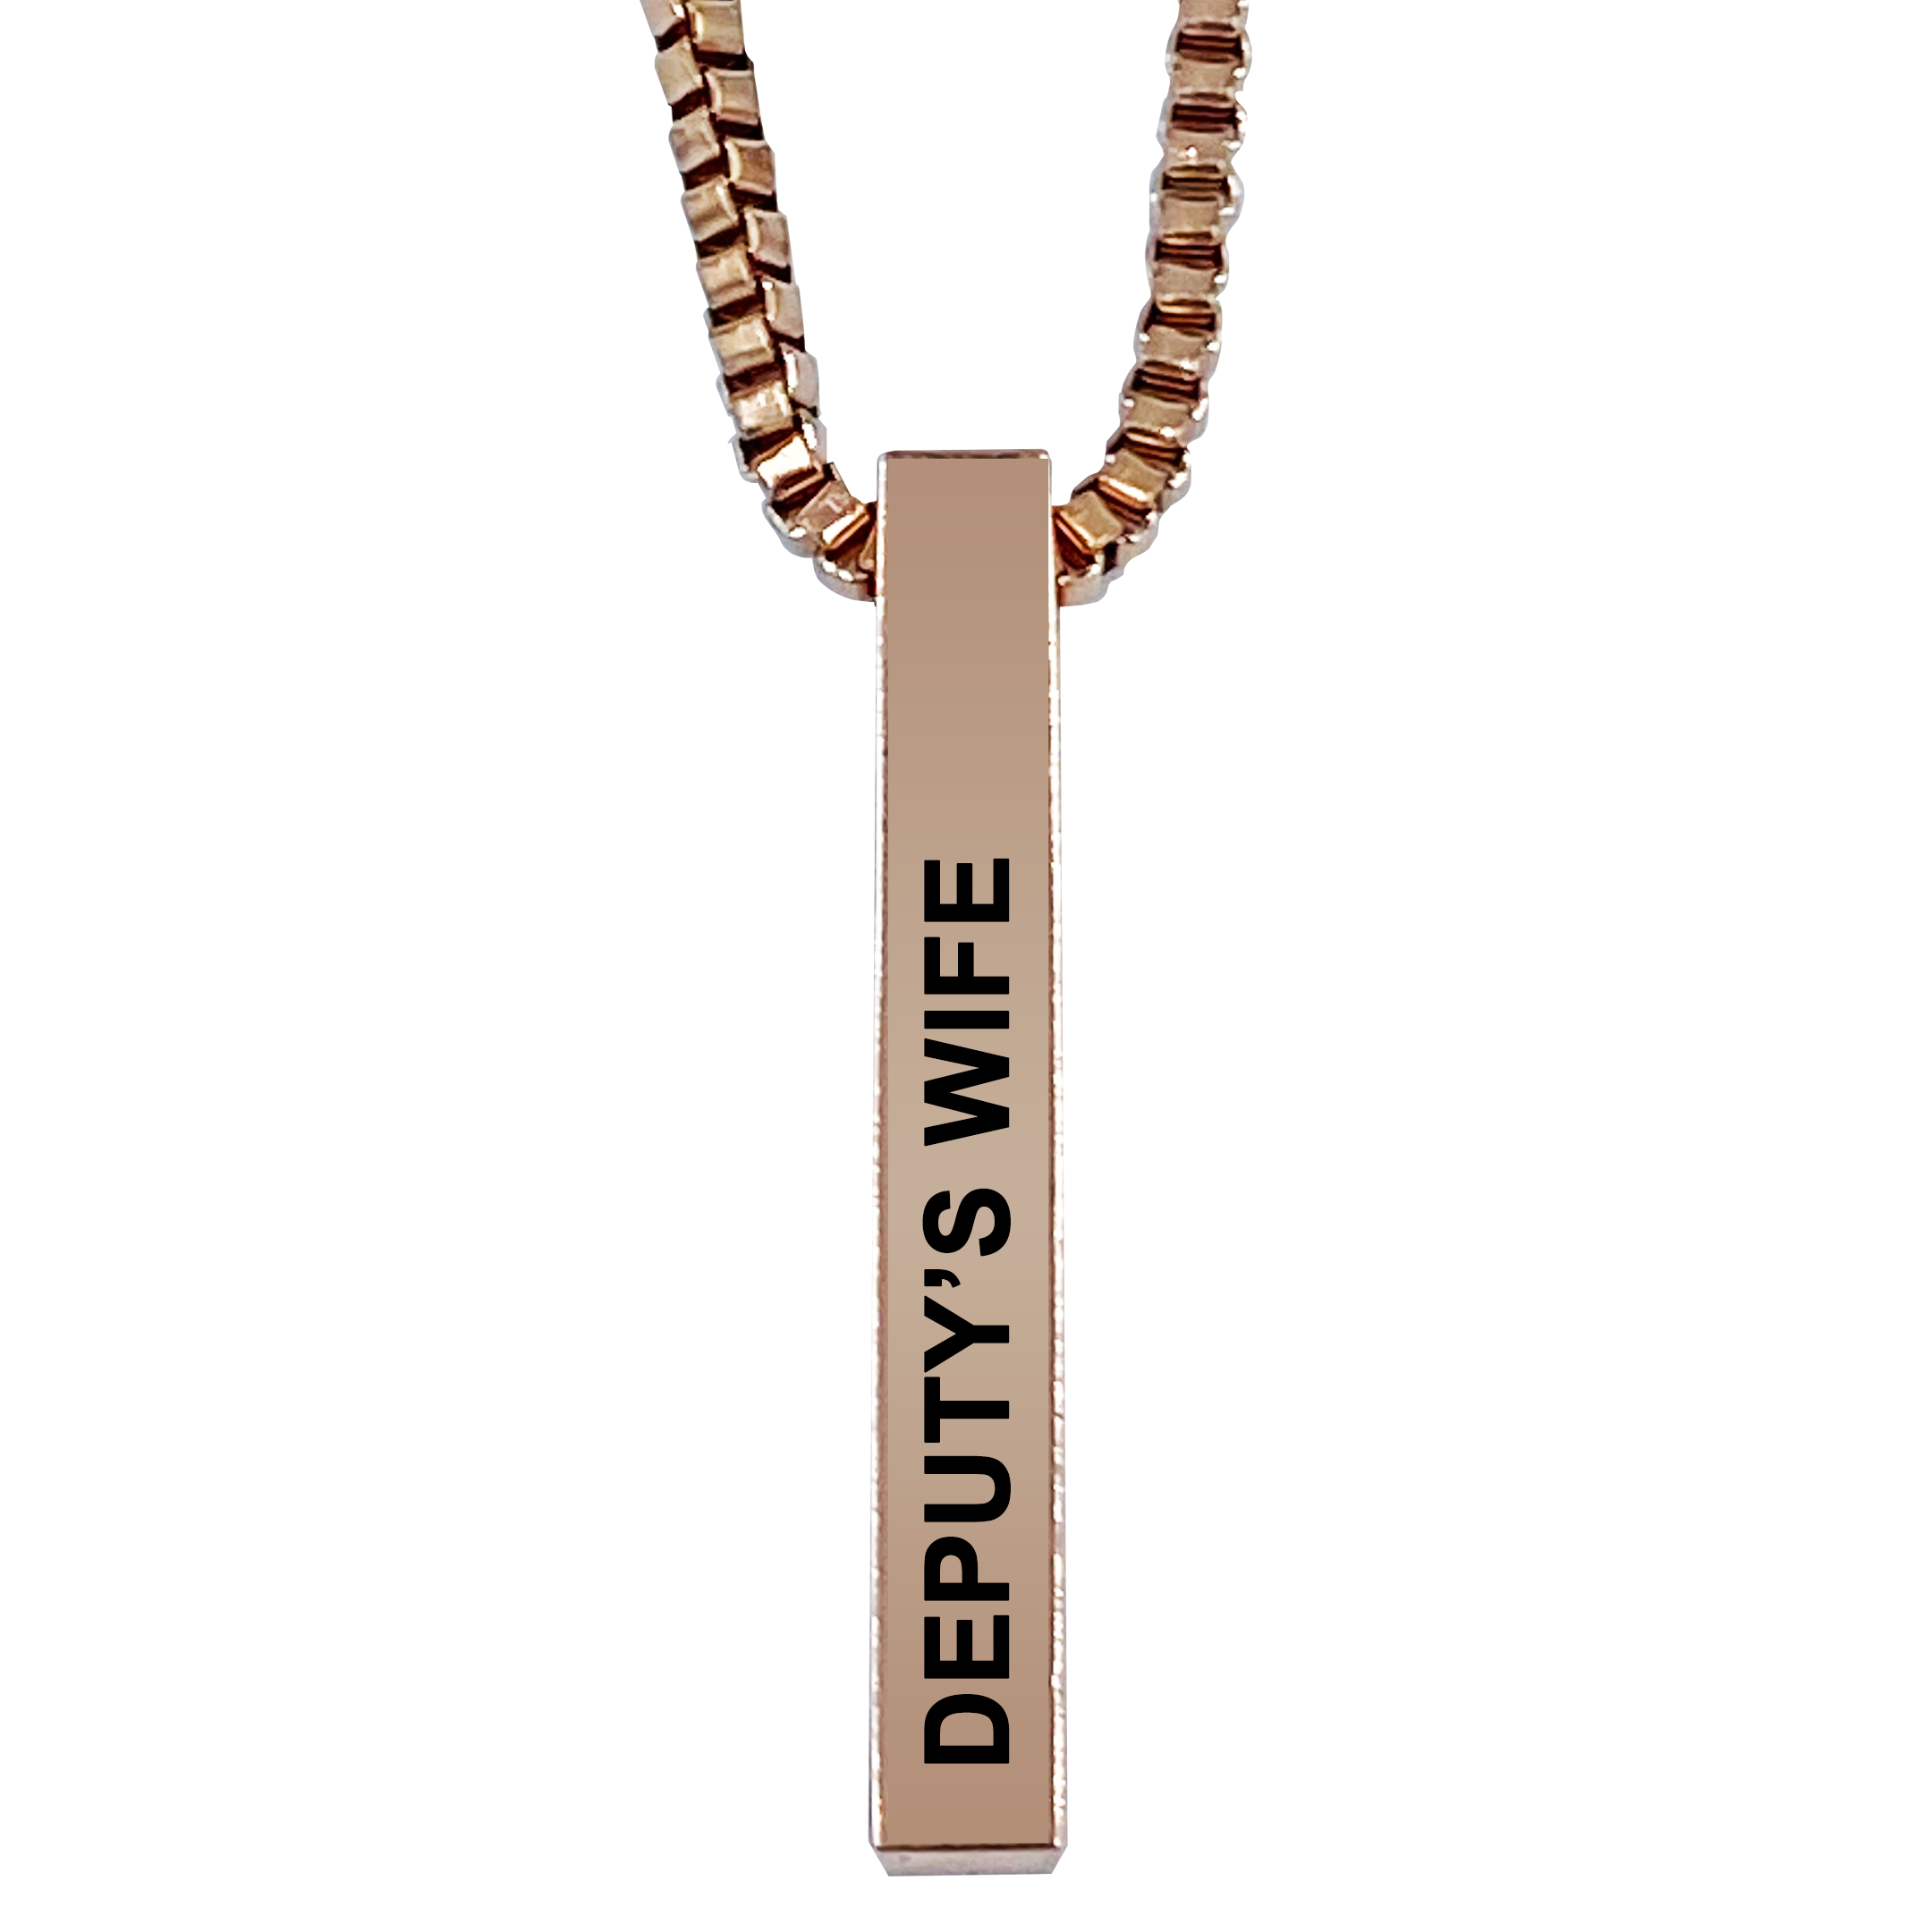 Deputy's Wife Rose Gold Plated Pillar Bar Pendant Necklace Gift Mother's Day Christmas Holiday Anniversary Police Sheriff Officer First Responder Law Enforcement